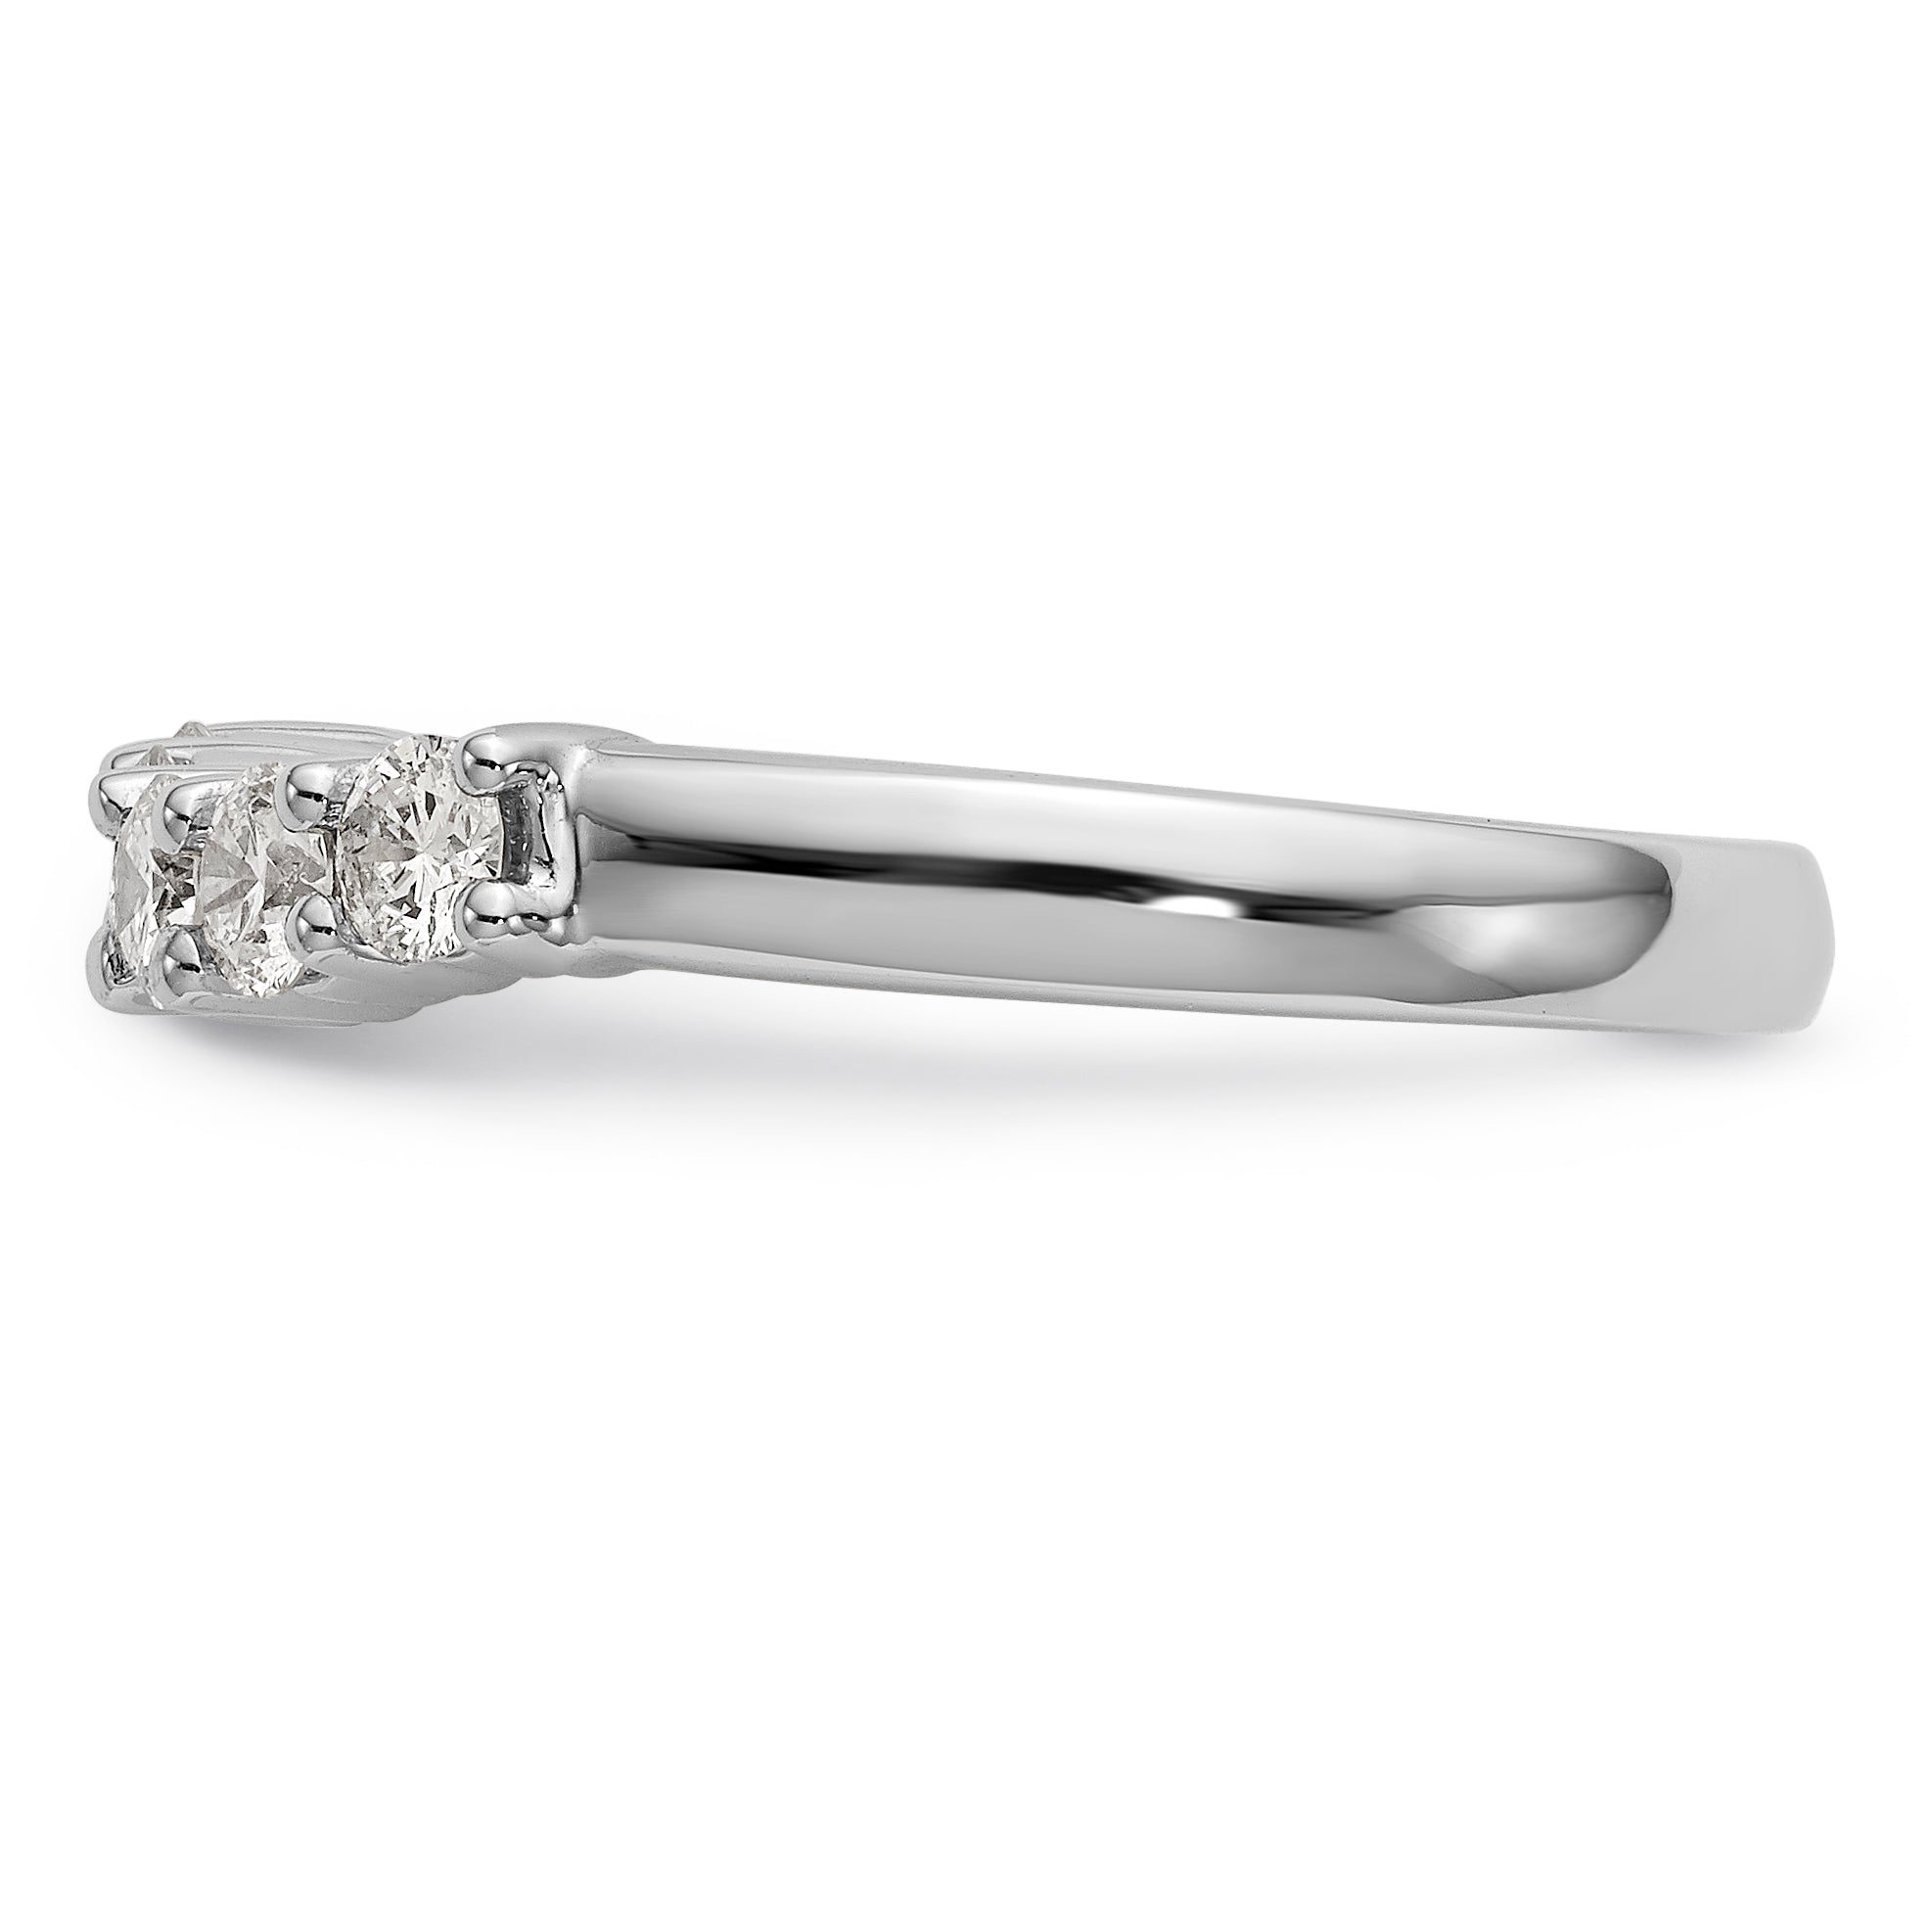 14K White Gold 5-Stone Shared Prong 1/2 carat Round Complete Diamond Band